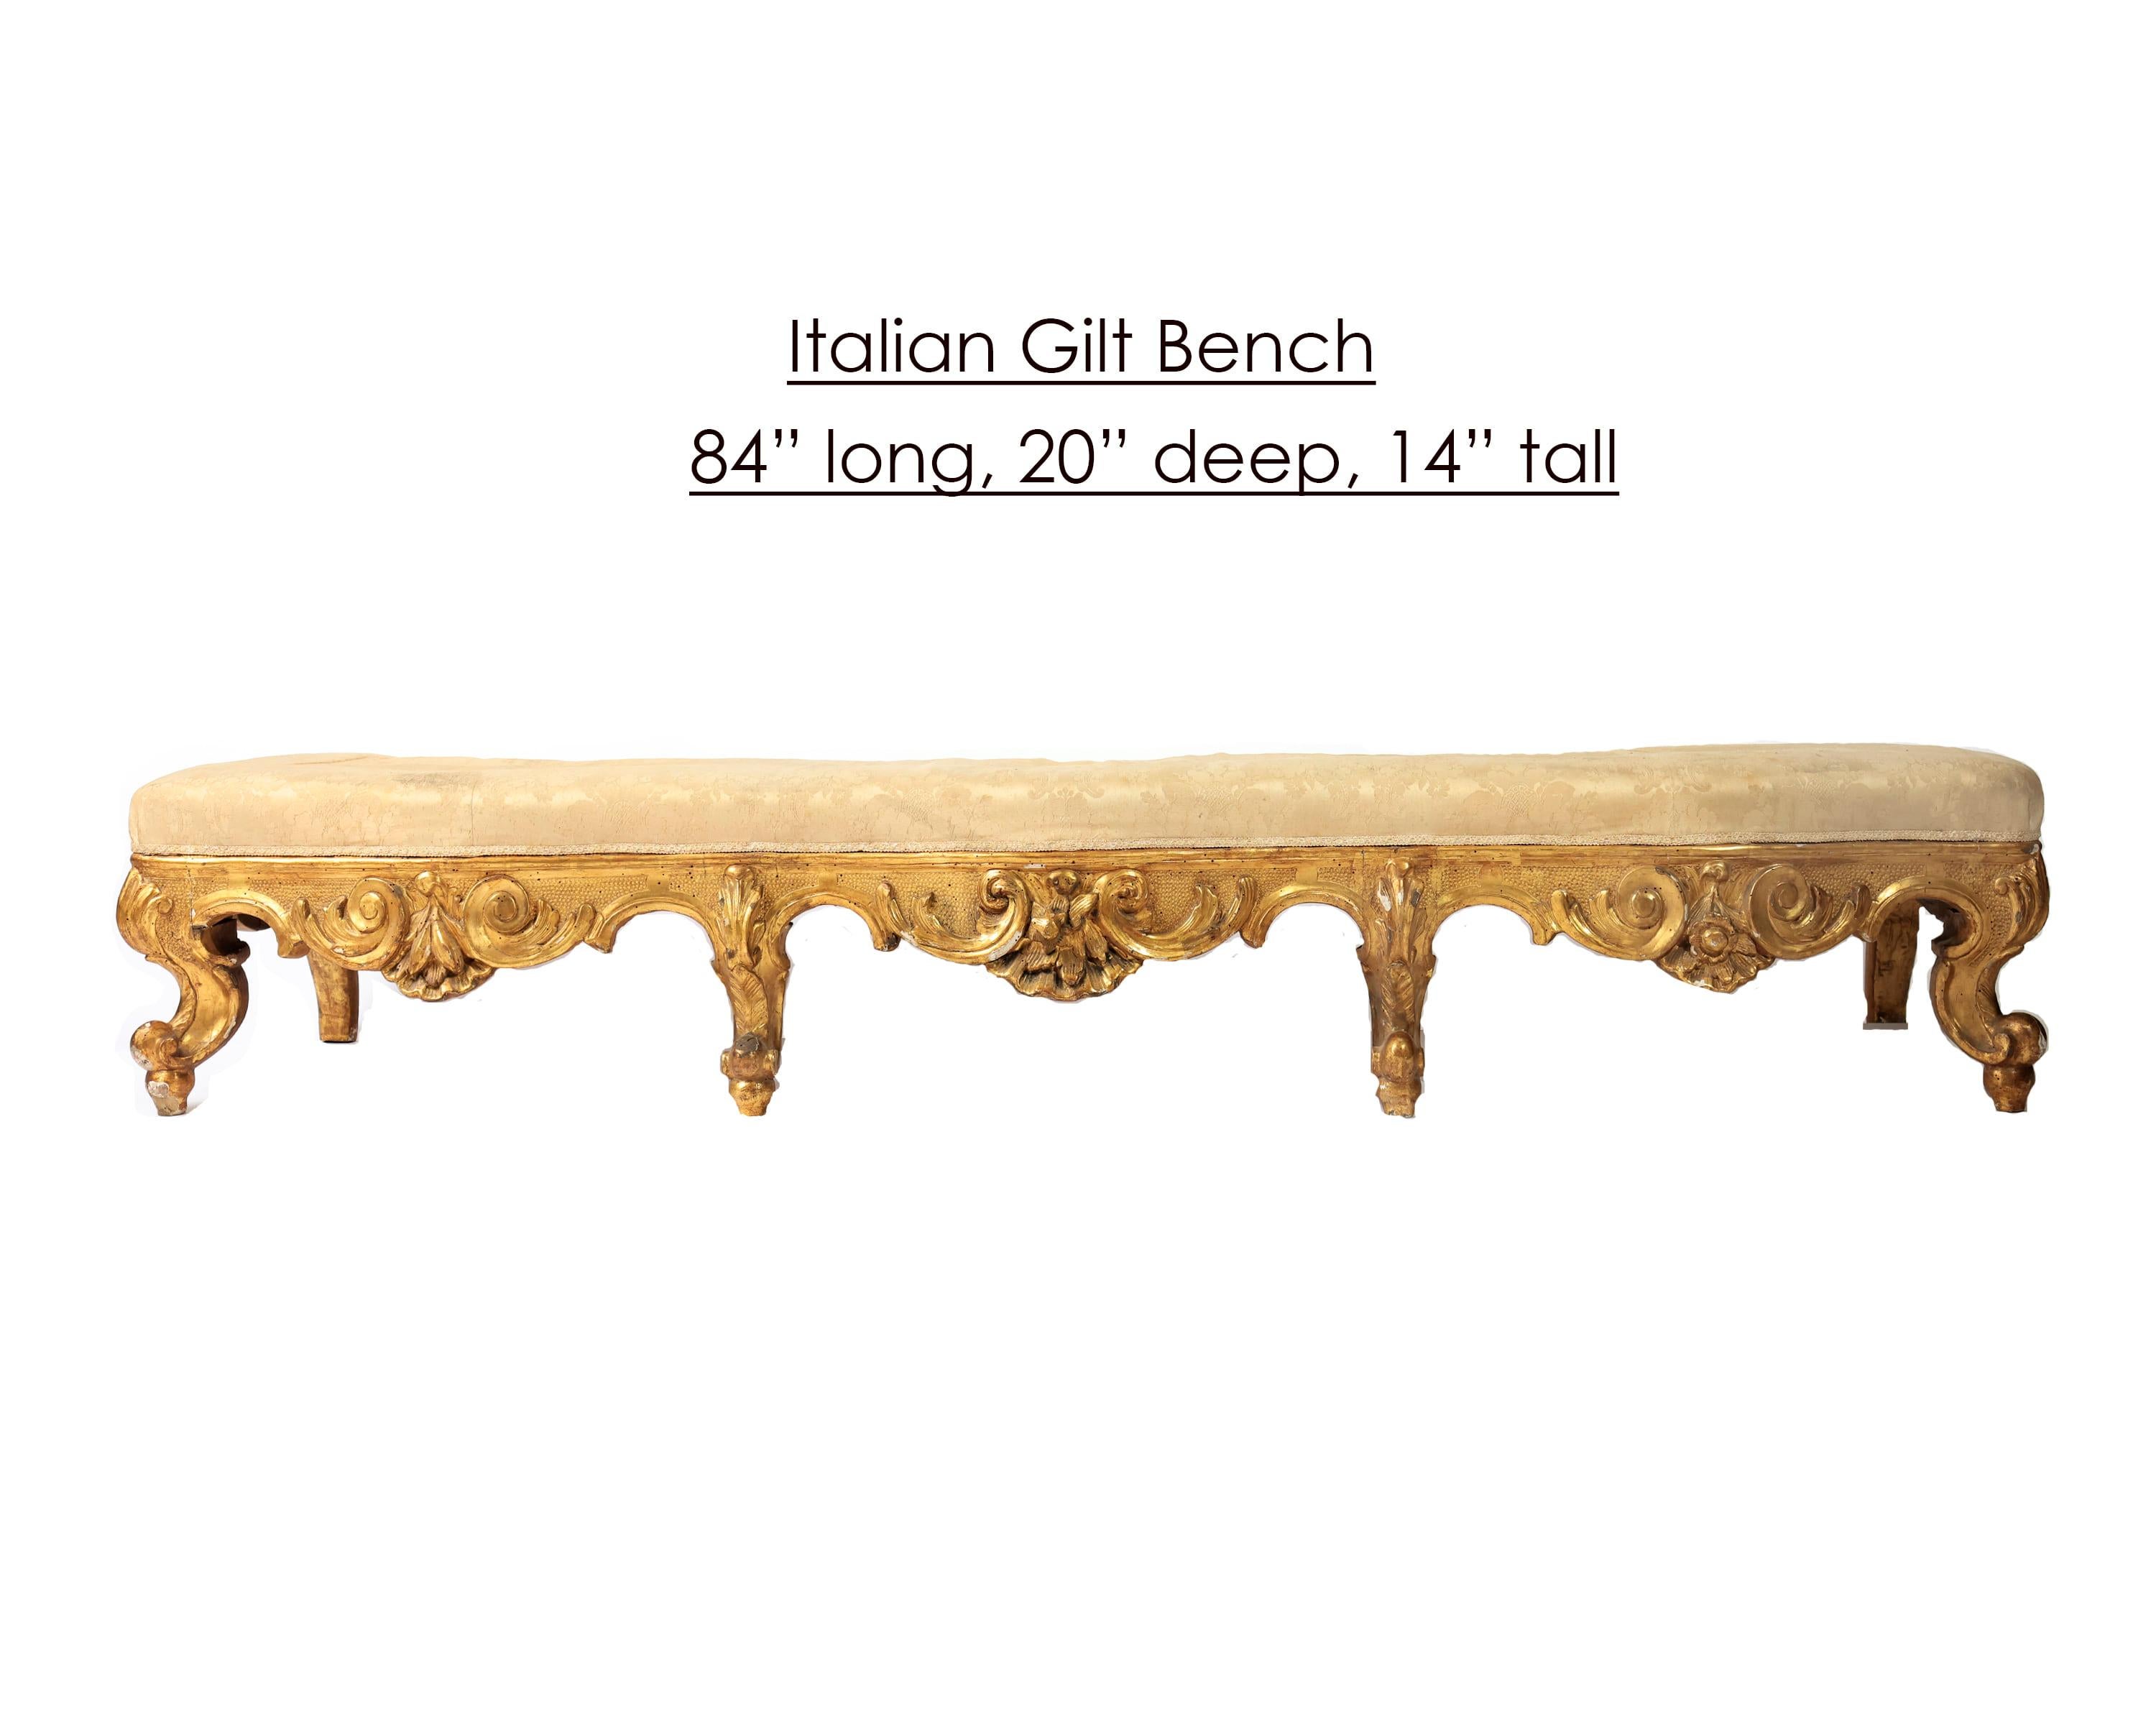 The impressive scale and ornate carved details in this magnificent 18th century gilt bench make it statement that is both functional and sculptural. The bench is Italian in origin and was purchased in L' Isle sur la Sougue, France. 

The exposed